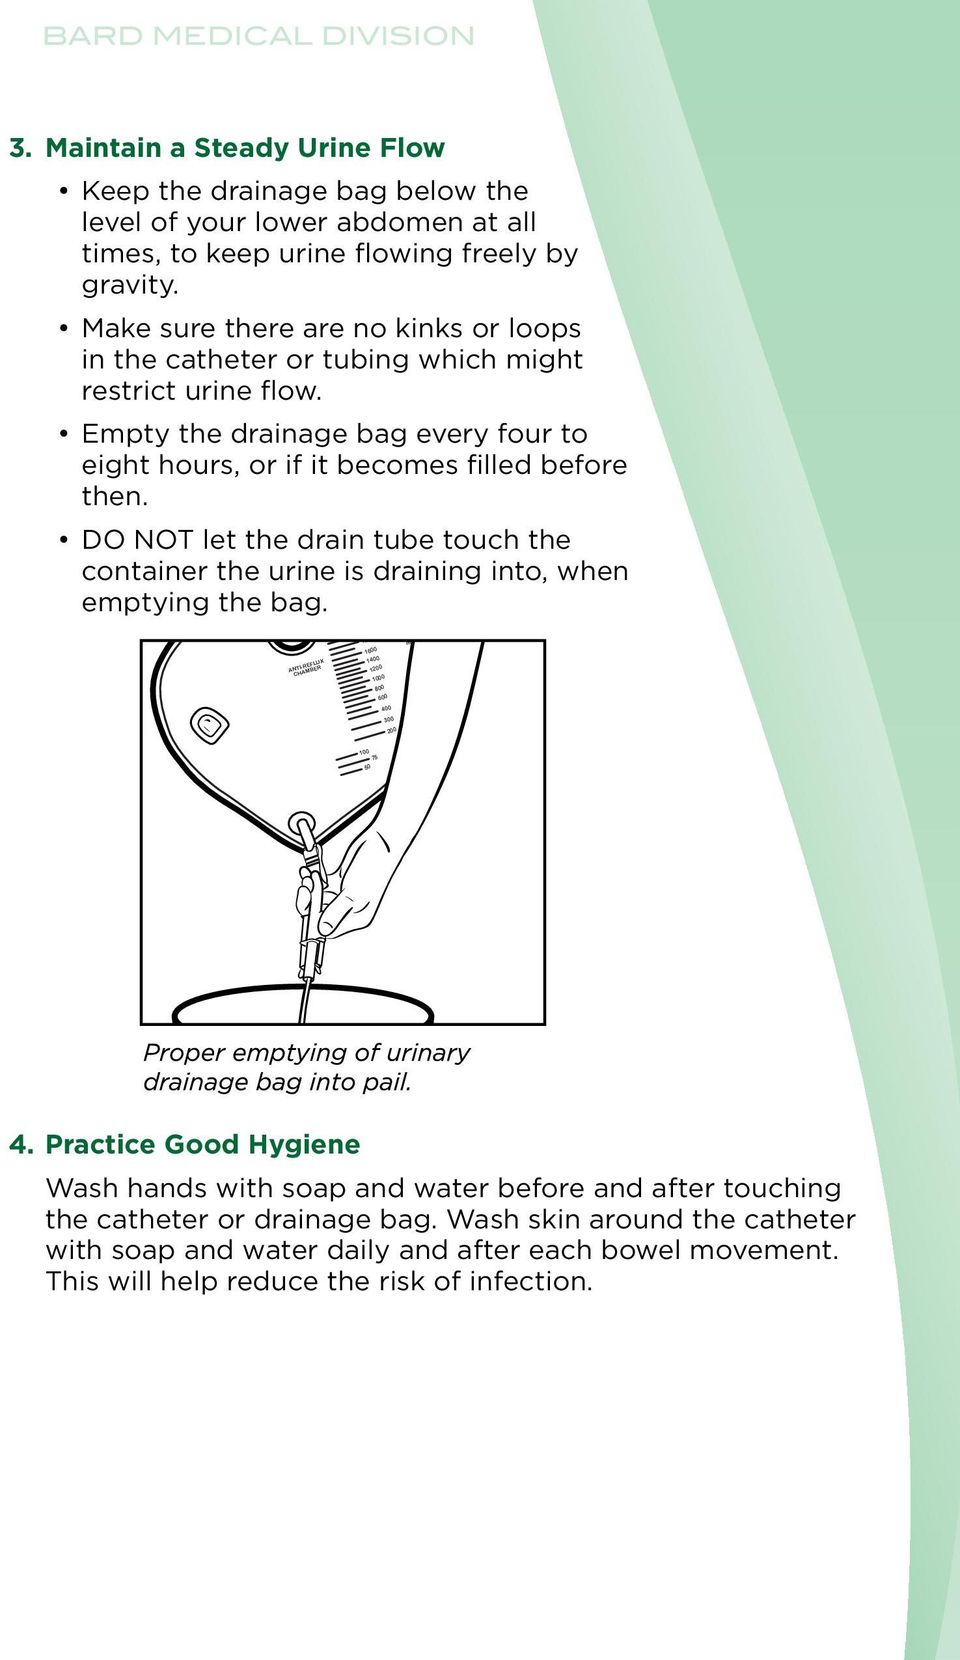 DO NOT let the drain tube touch the container the urine is draining into, when emptying the bag.